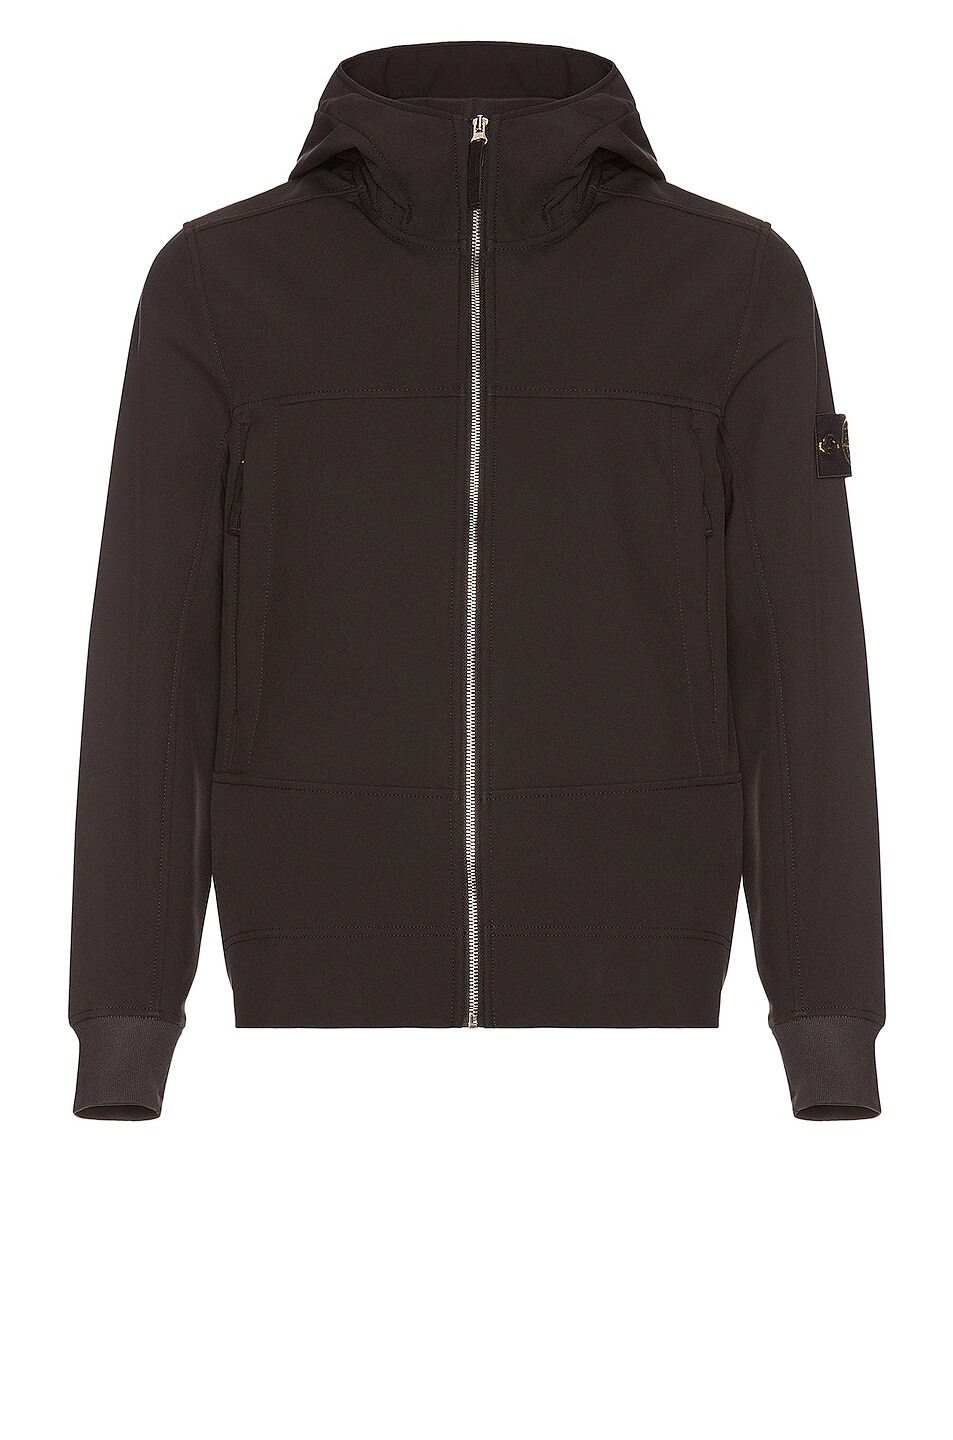 Image 1 of Stone Island Light Outerwear Jacket in Black